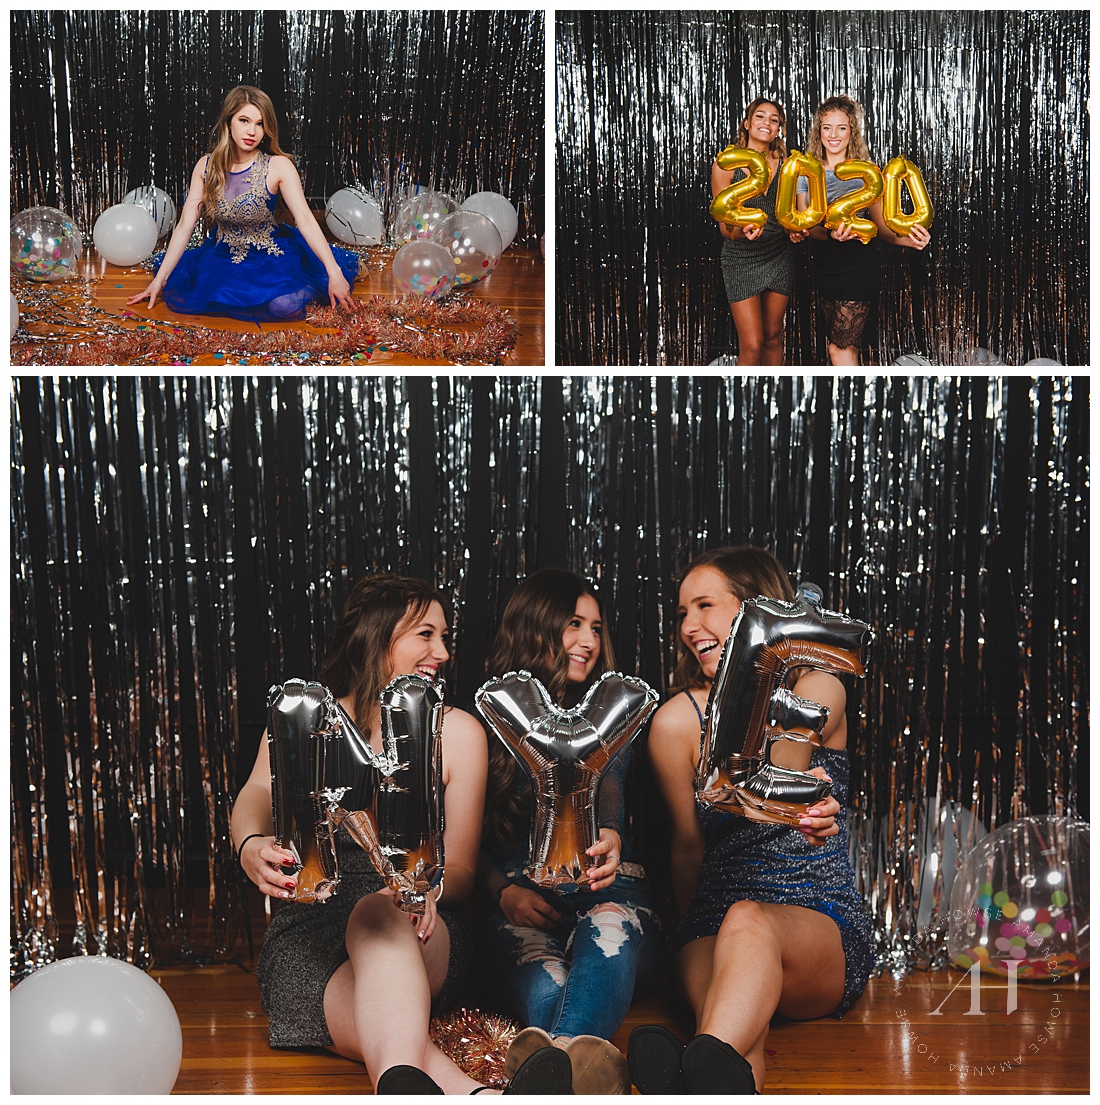 2020 and NYE Balloons for fun themed portraits for the class of 2020 photographed by Amanda Howse